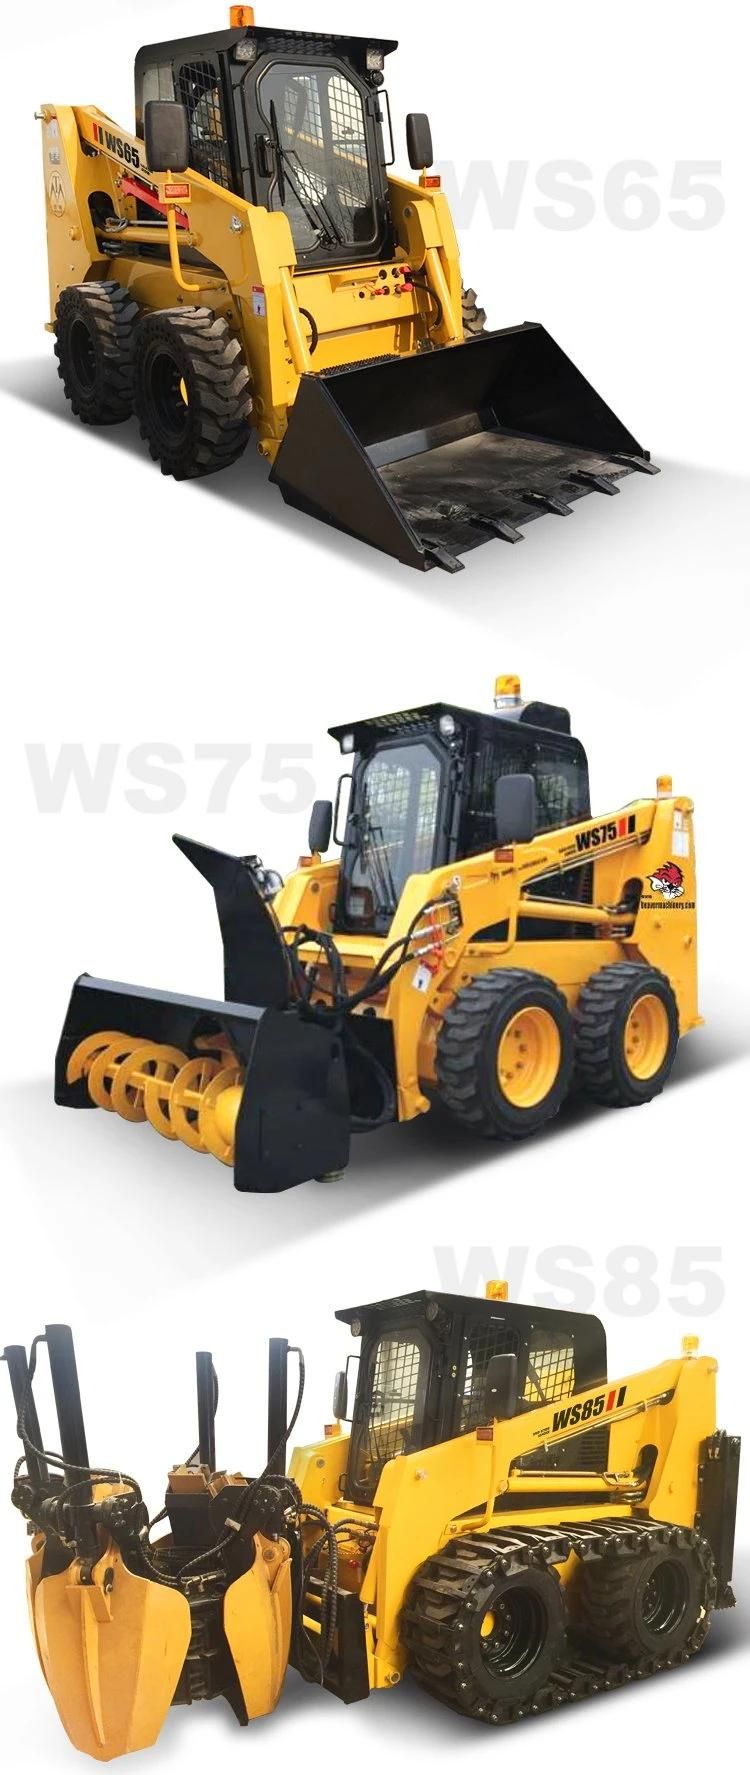 Hot Sale Skid Steer Loader Is on Sale in China Ws50